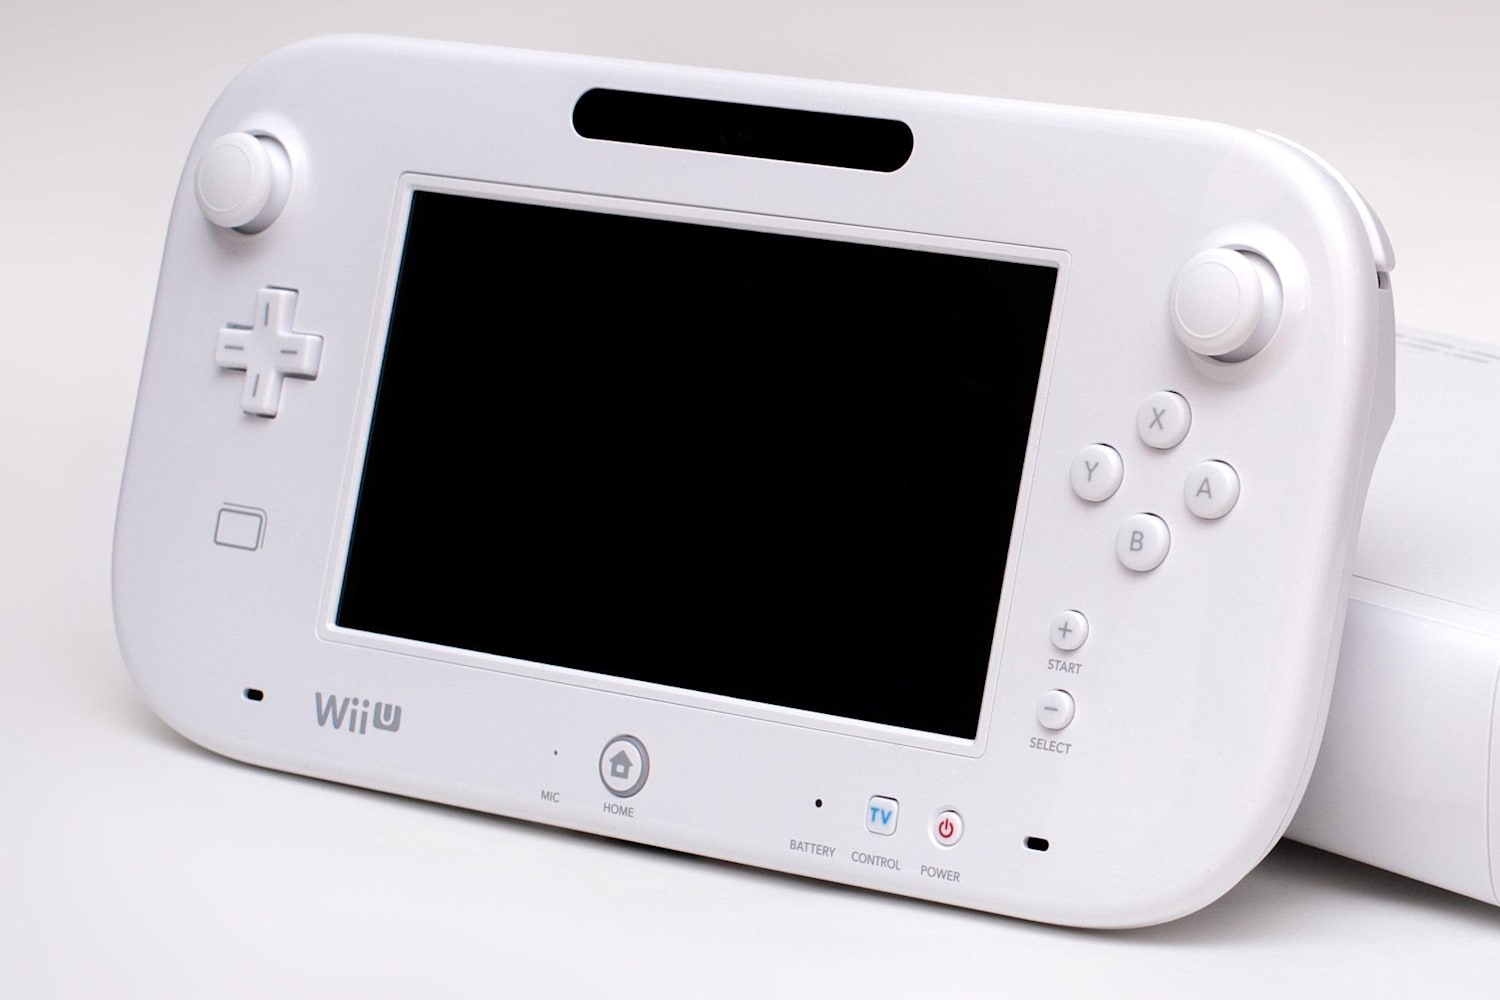 what is a nintendo wii u